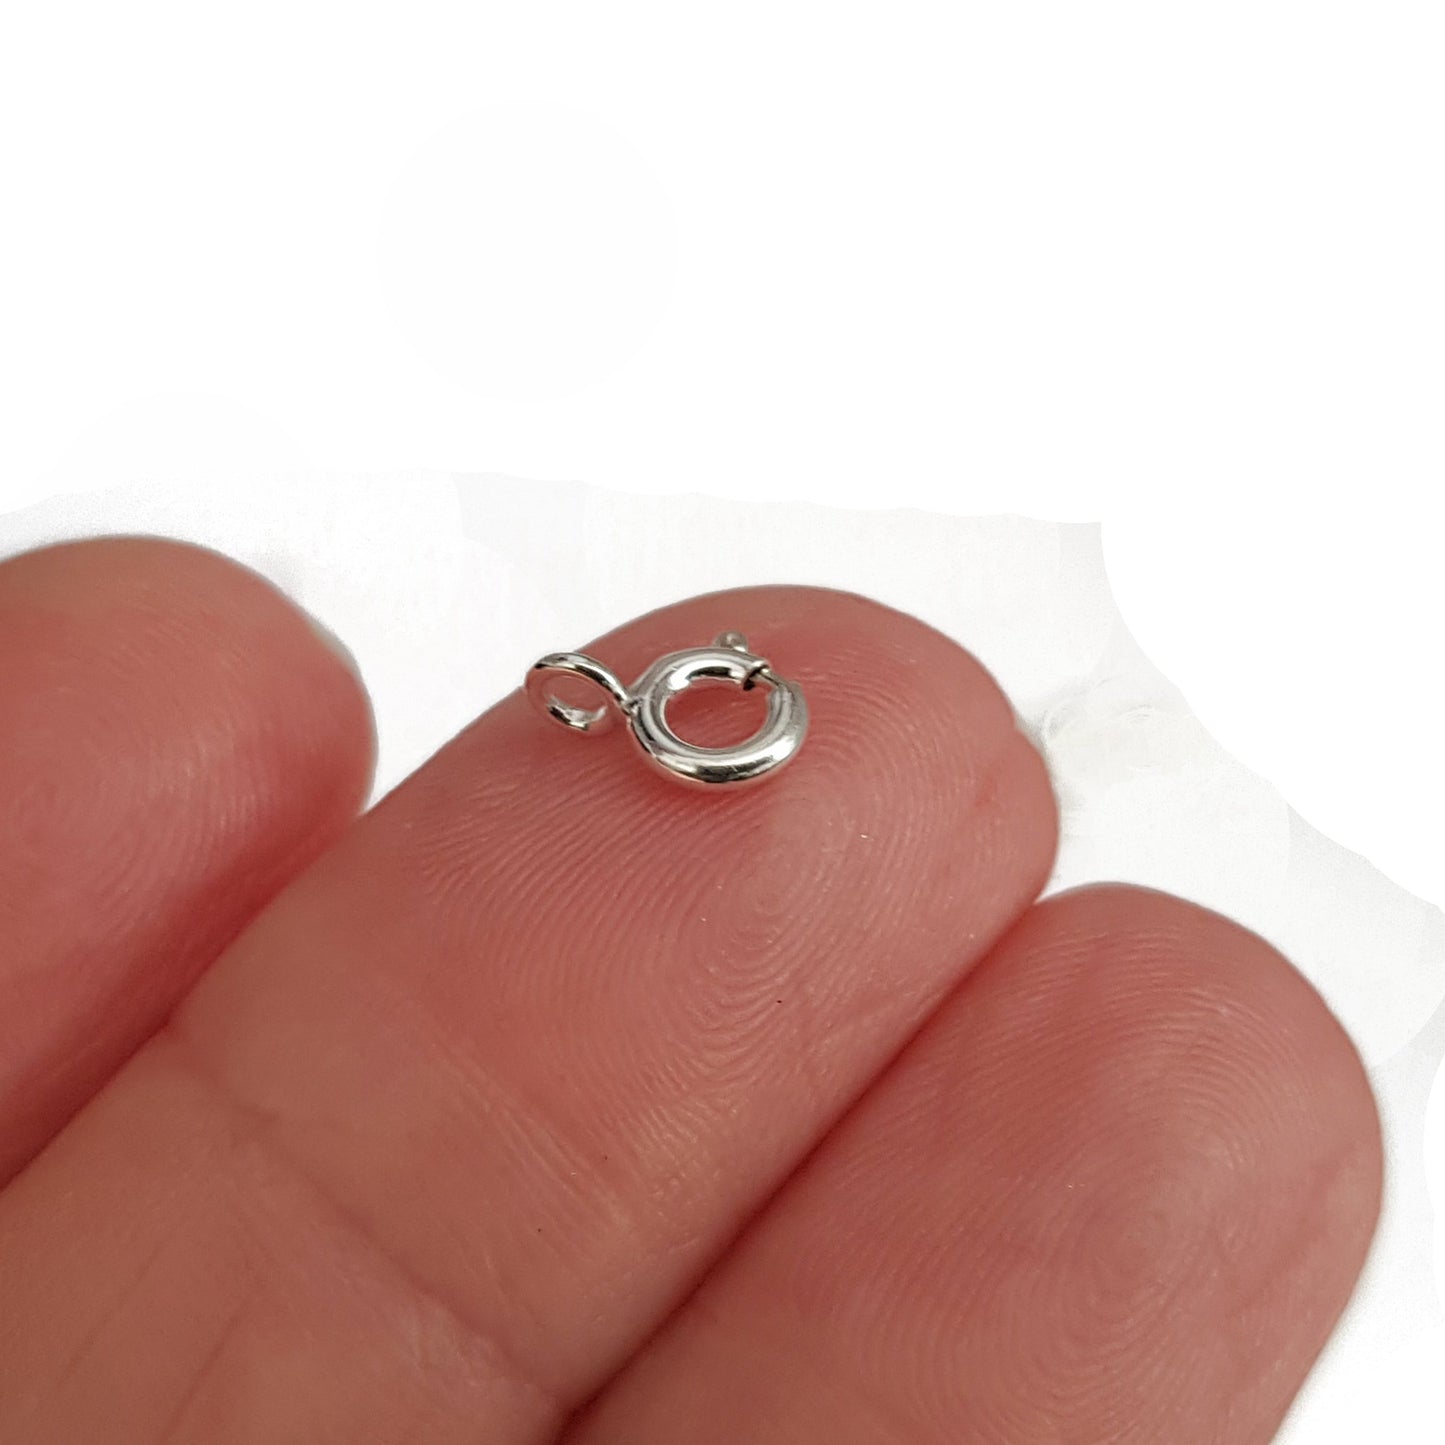 Bolt Ring Clasp 6mm Sterling Silver 3pcs | SS-022BR6 | Jewellery Supply - Kalitheo Jewellery